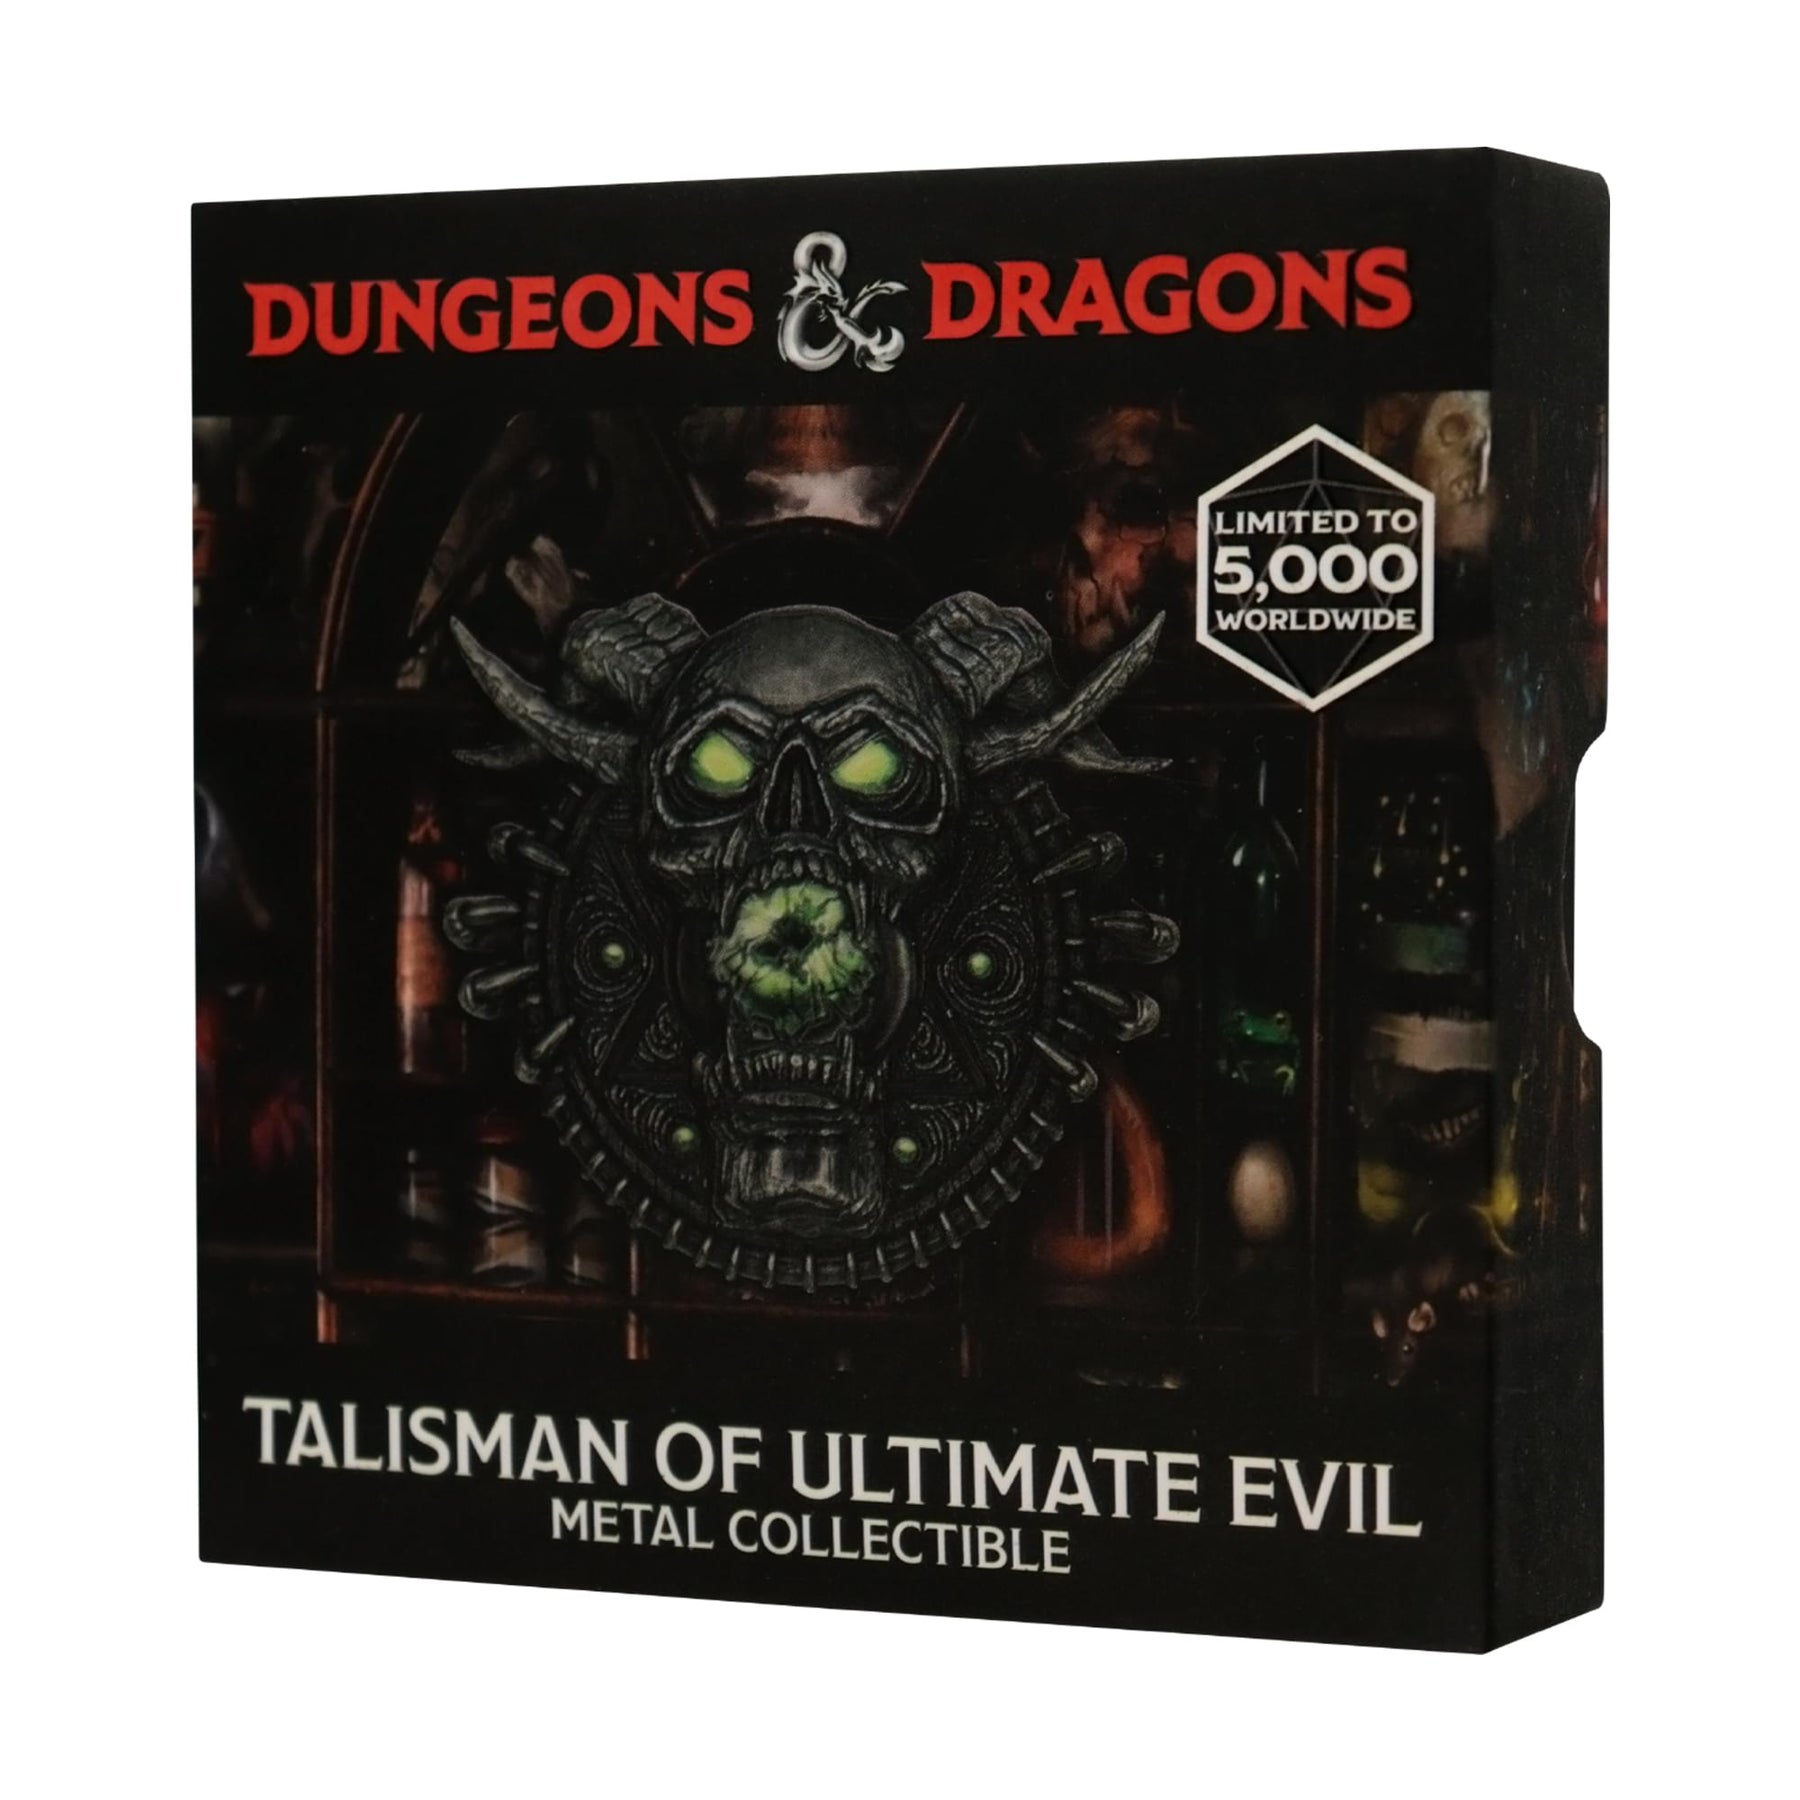 Dungeons & Dragons Talisman of Ultimate Evil Medallion and Art Card